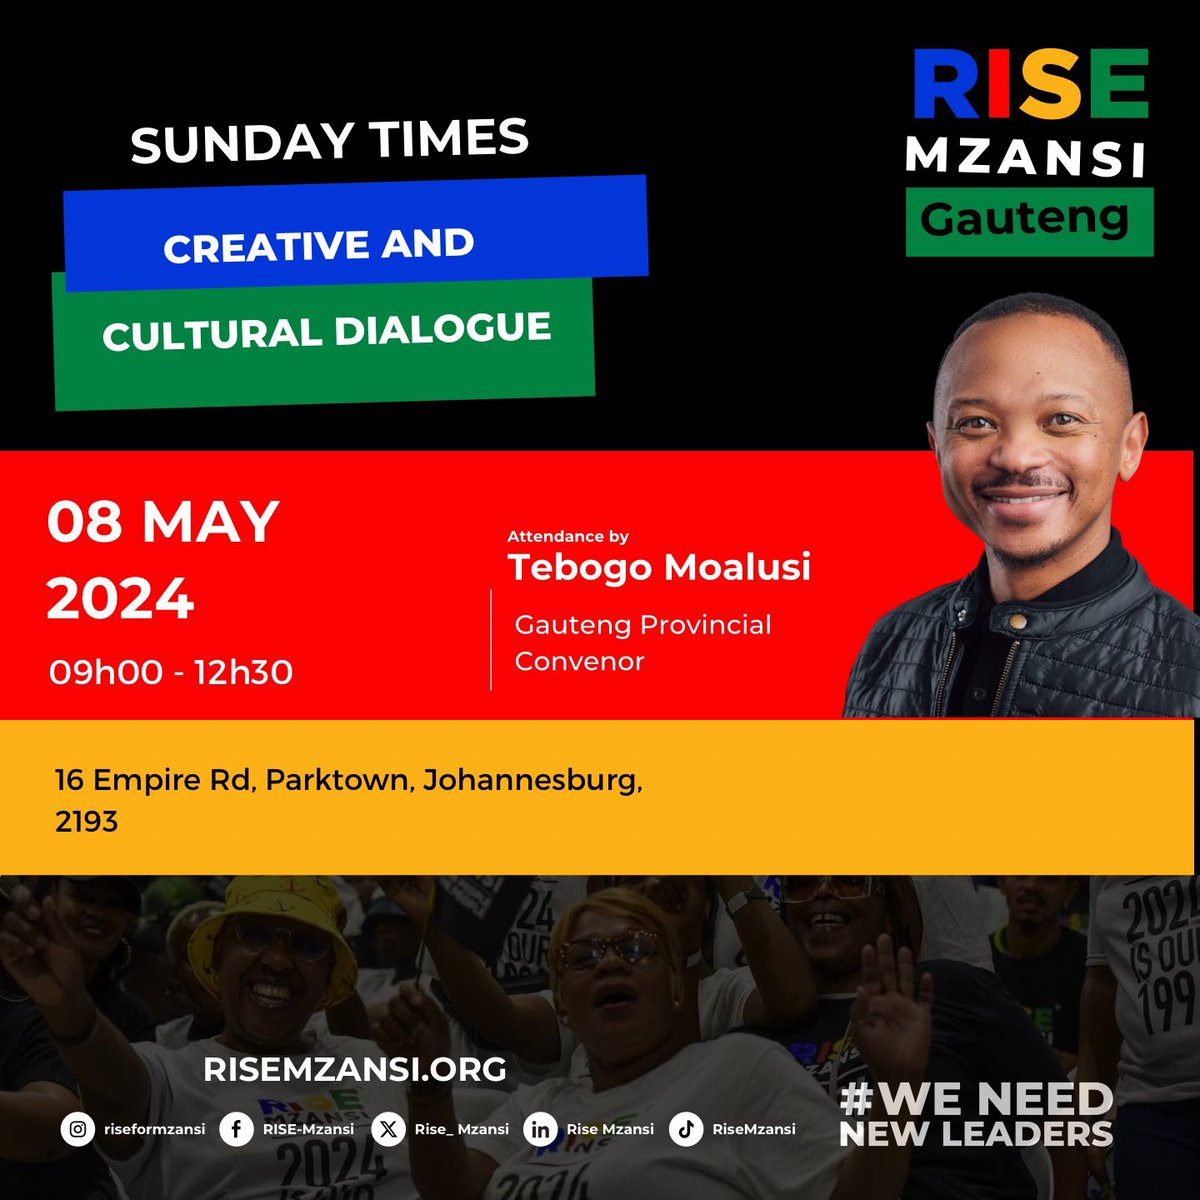 The Gauteng Provincial Convenor, Tebogo Moalusi, will be taking part in the Sunday Times Creative and Cultural National Dialogue to unpack the solutions that RISE Mzansi has to offer to the respective industries.

#WeNeedNewLeaders 
#VoteRISEMzansi